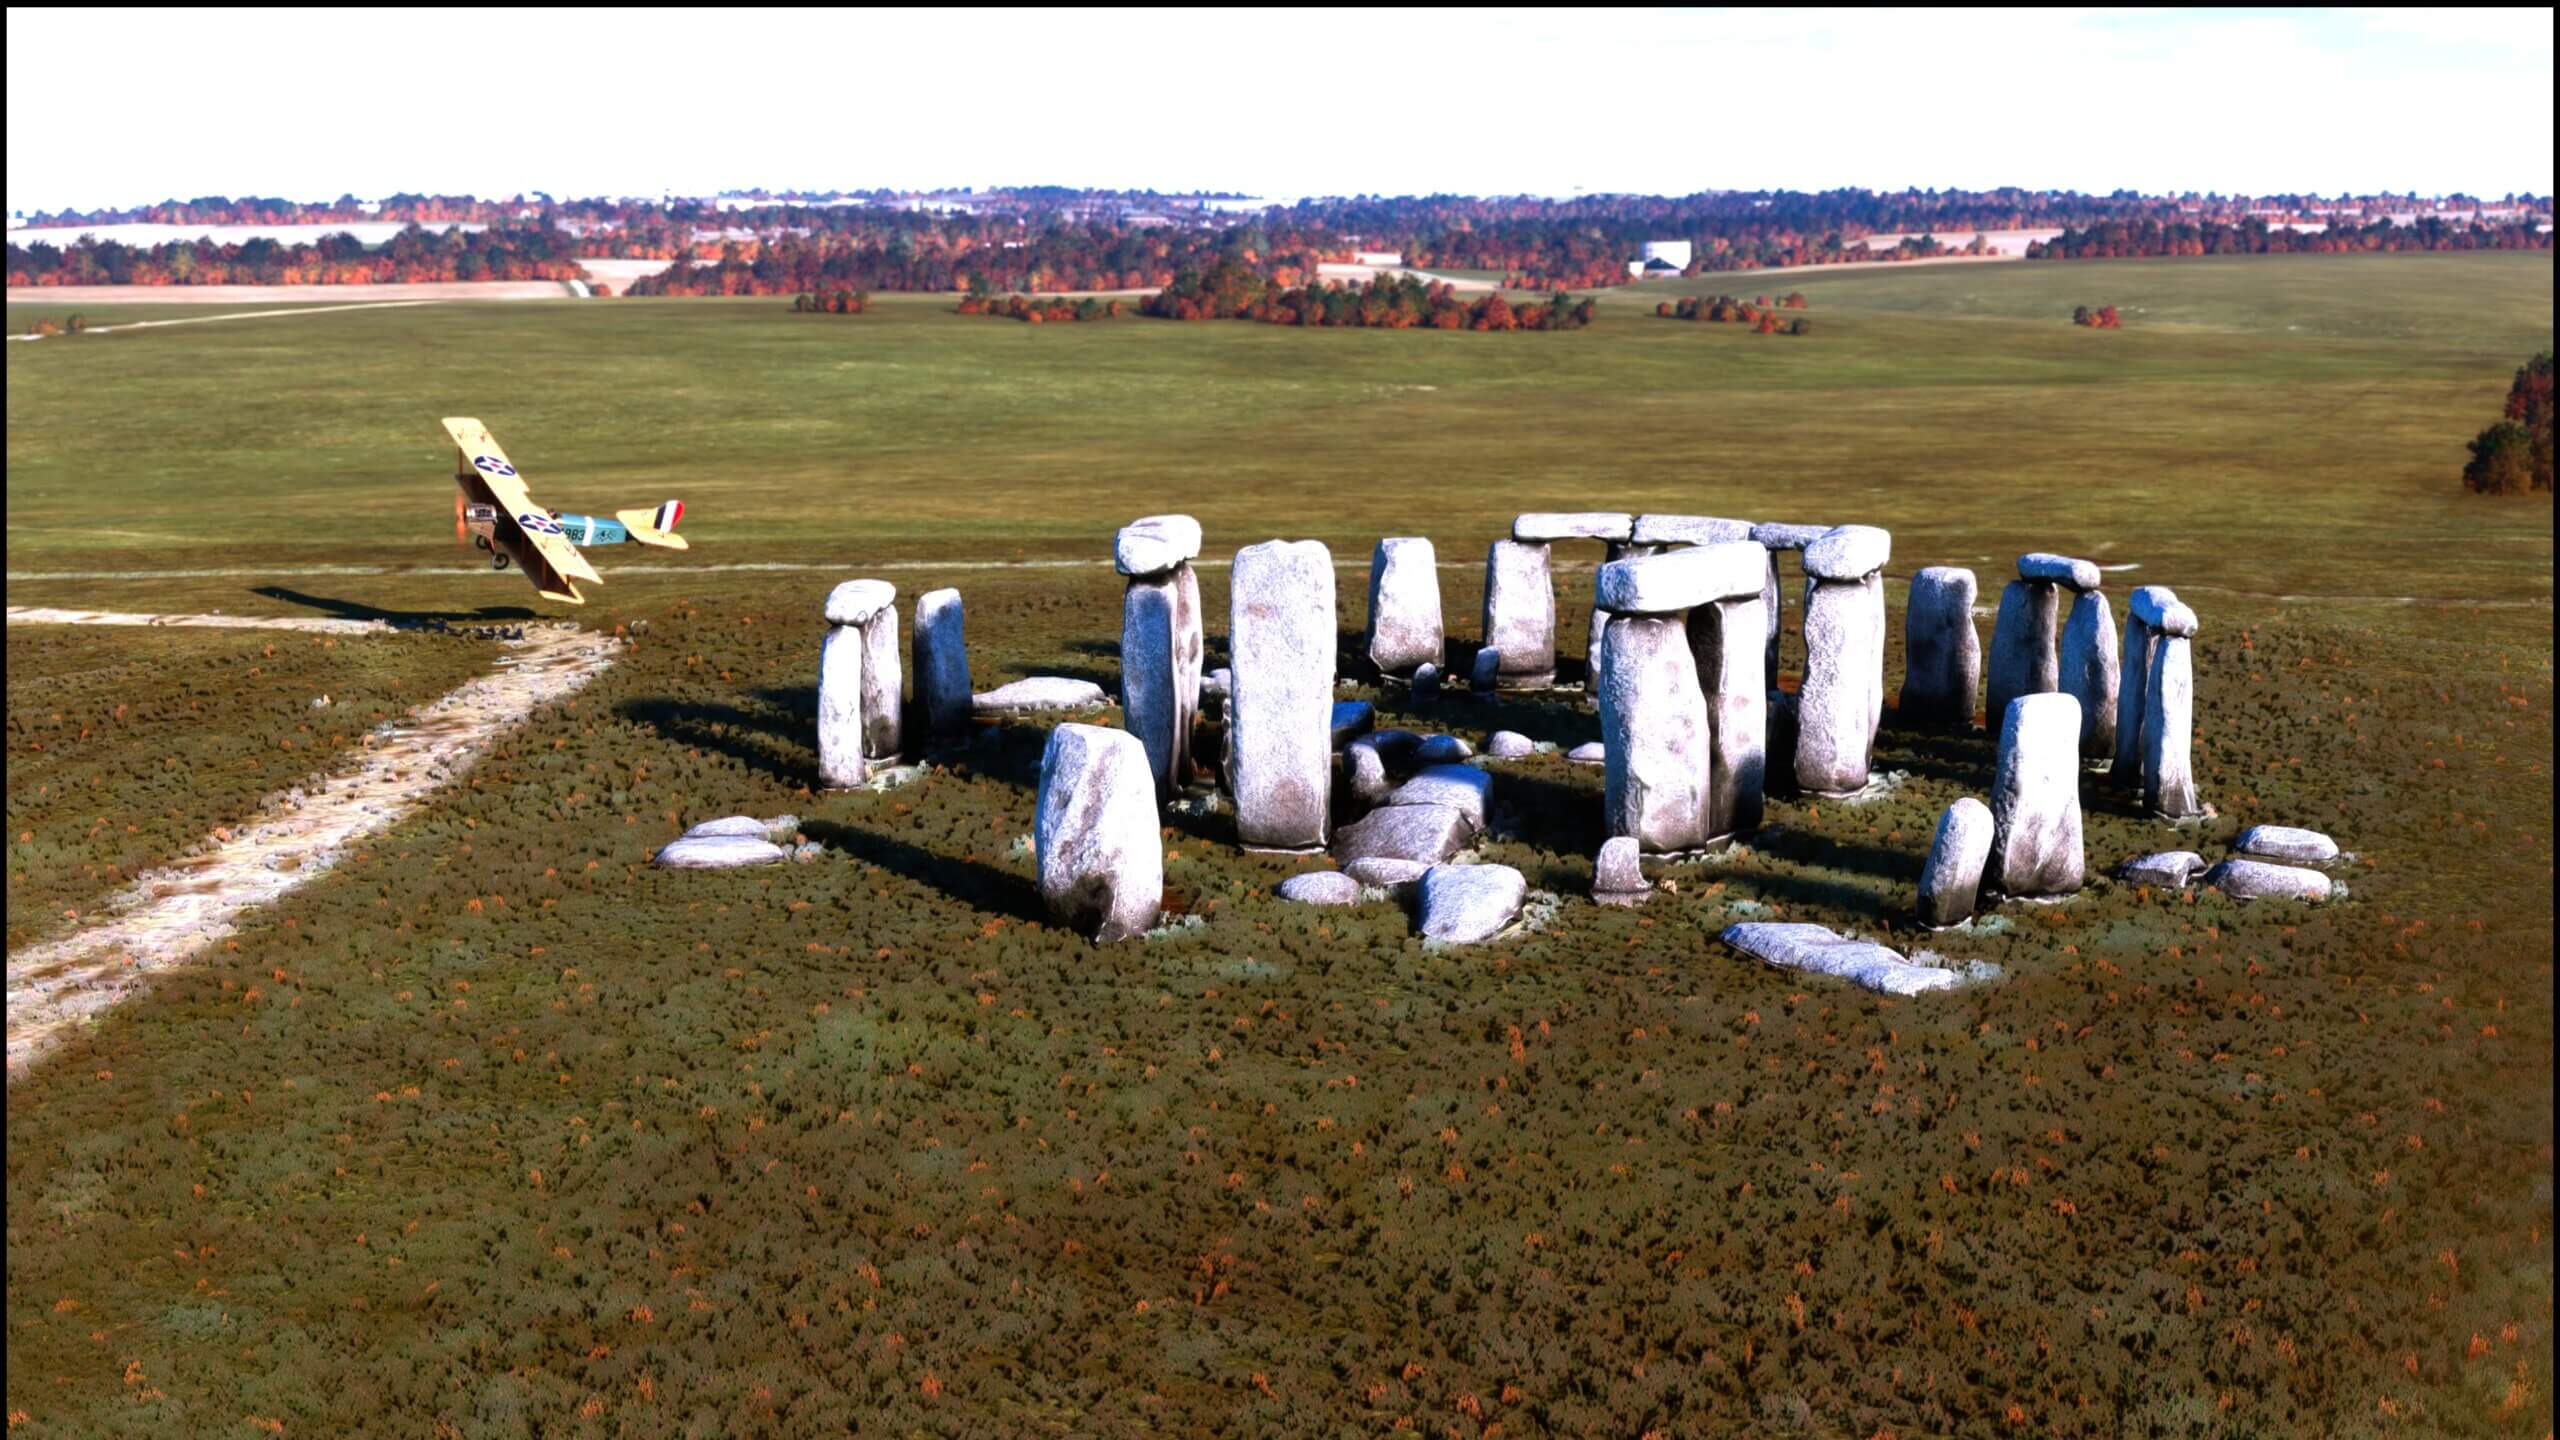 A bi-plane takes a close up view of Stonehenge, with a low flyby of the historic monument.